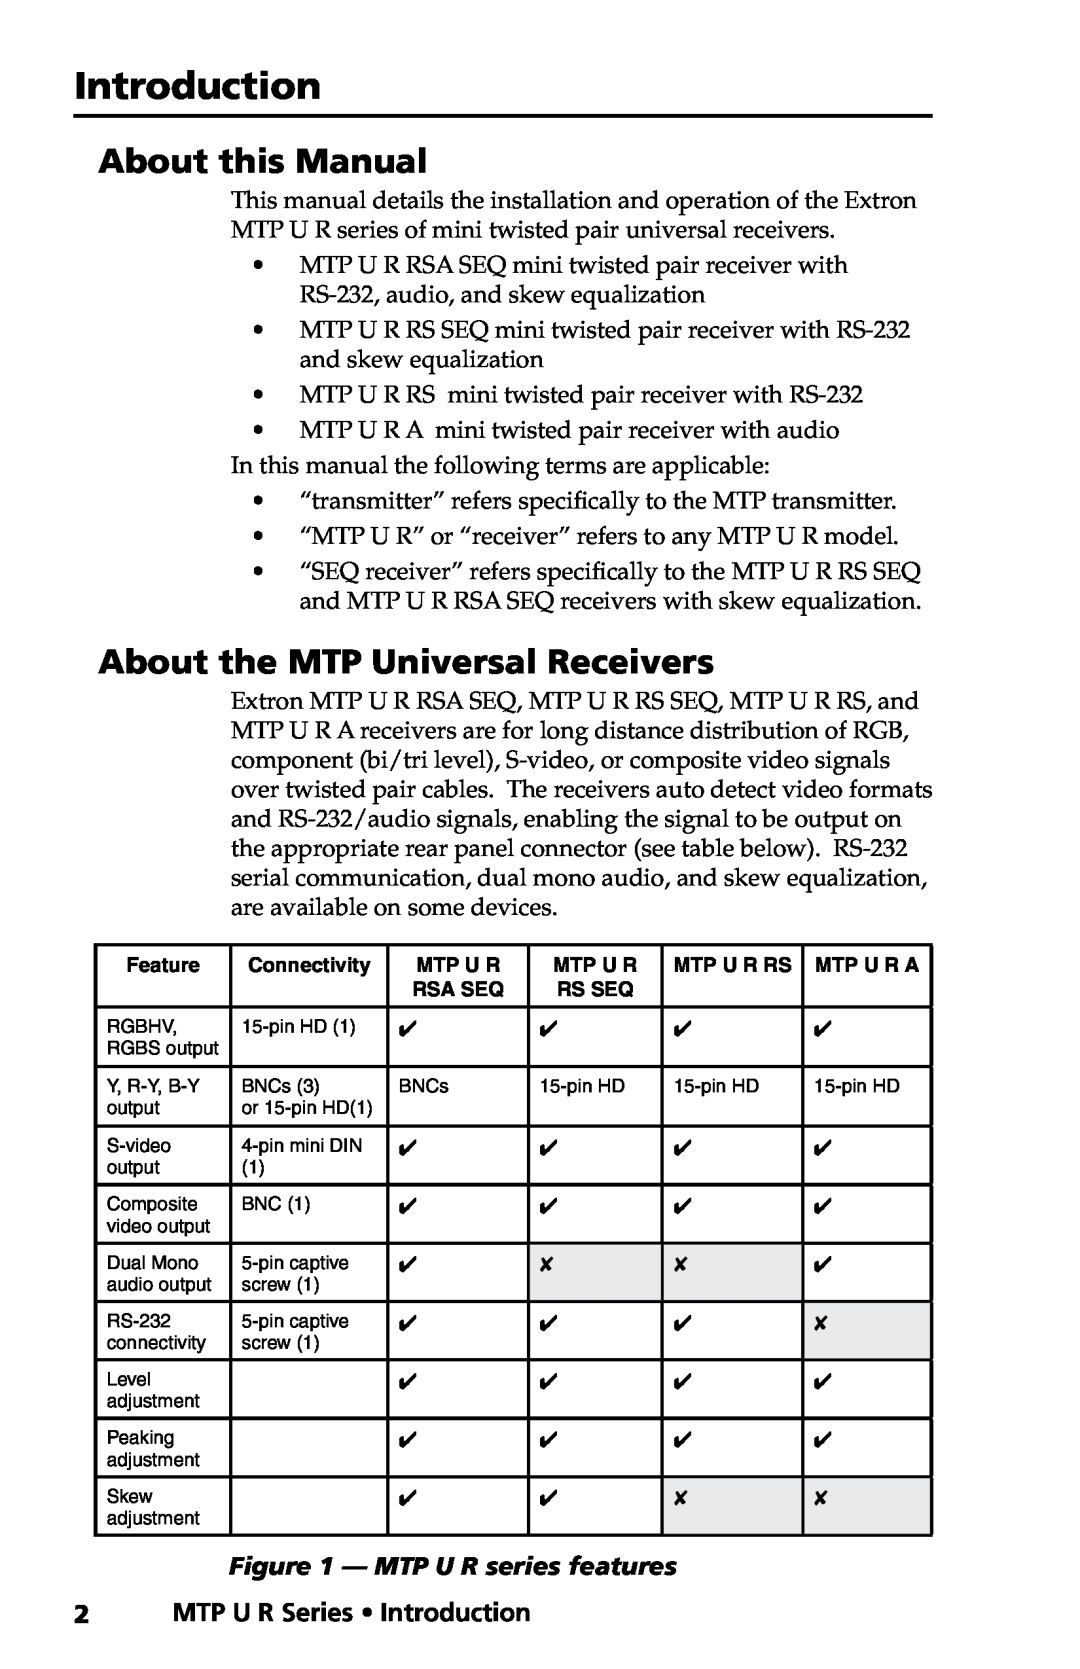 Extron electronic MTP U R RS SEQ, MTP U R A manual Introduction, About this Manual, About the MTP Universal Receivers 